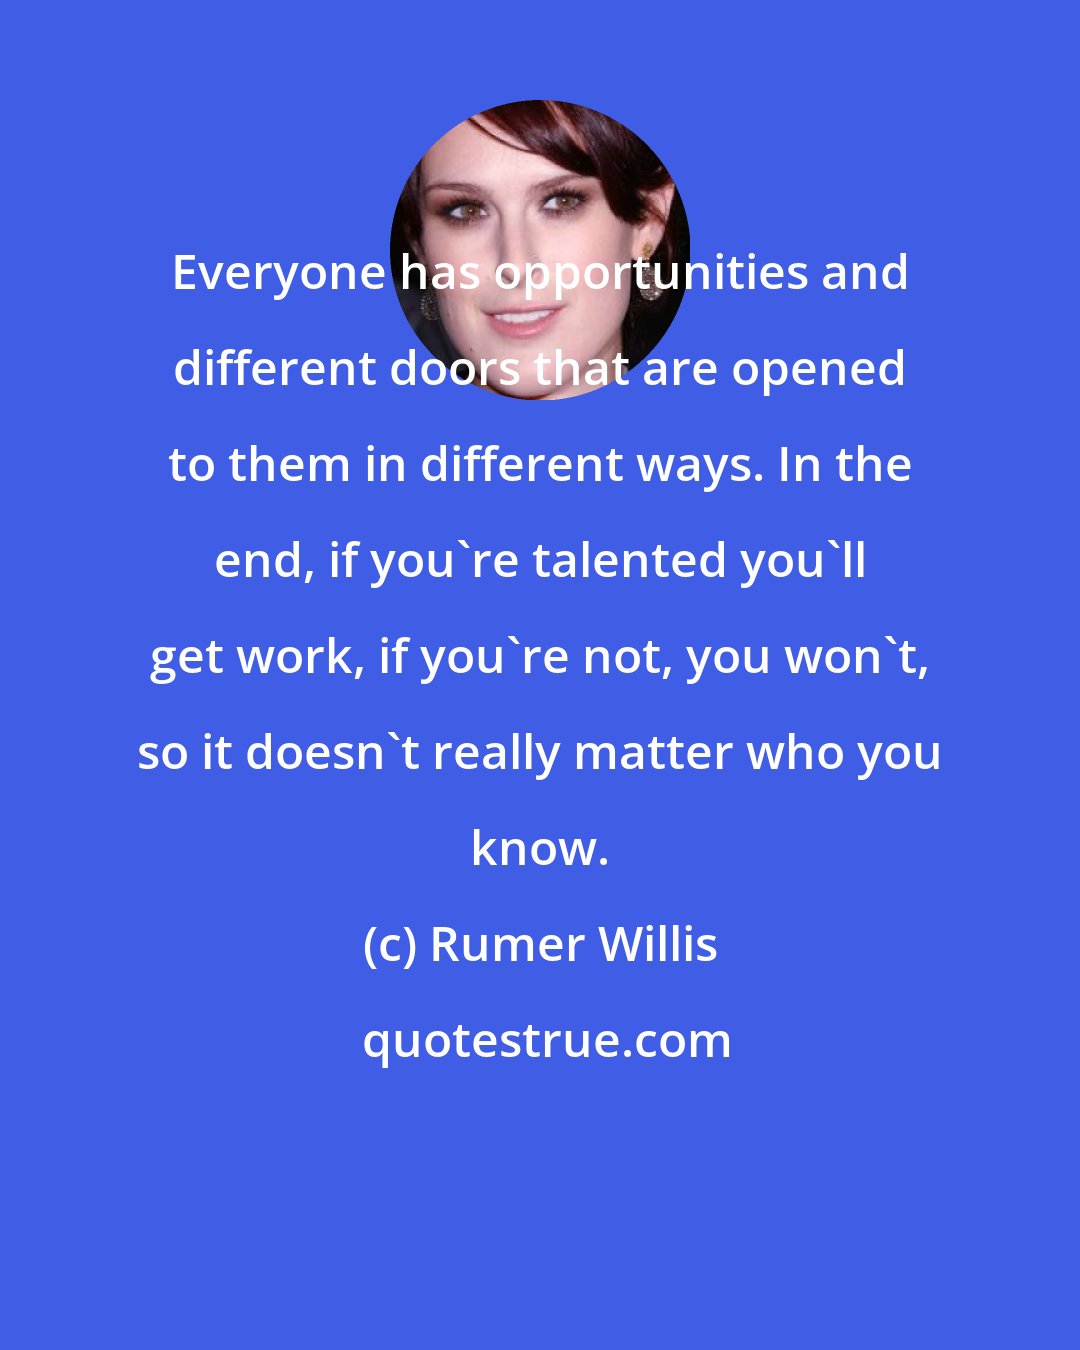 Rumer Willis: Everyone has opportunities and different doors that are opened to them in different ways. In the end, if you're talented you'll get work, if you're not, you won't, so it doesn't really matter who you know.